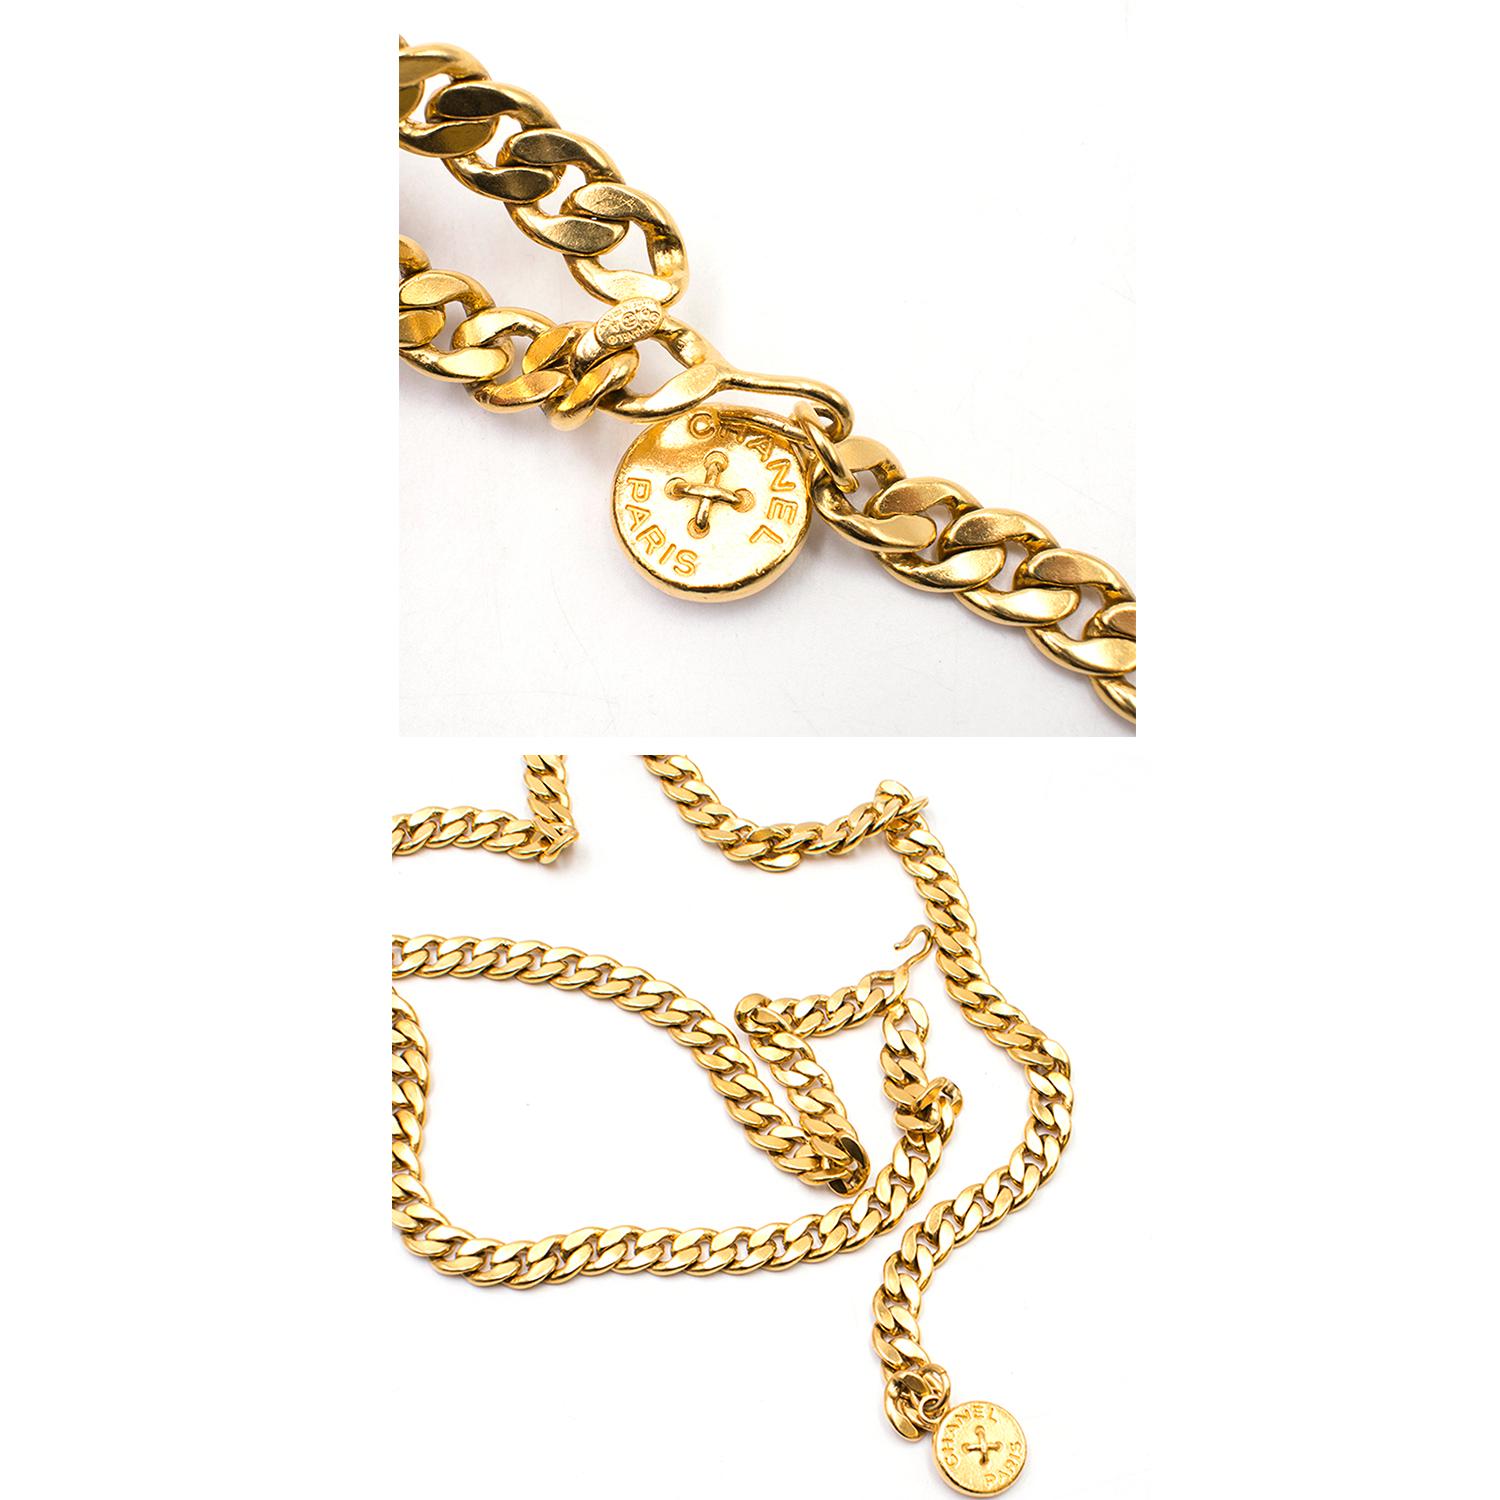 Chanel Vintage 1994 Gold-plated Chain Belt/Necklace 1